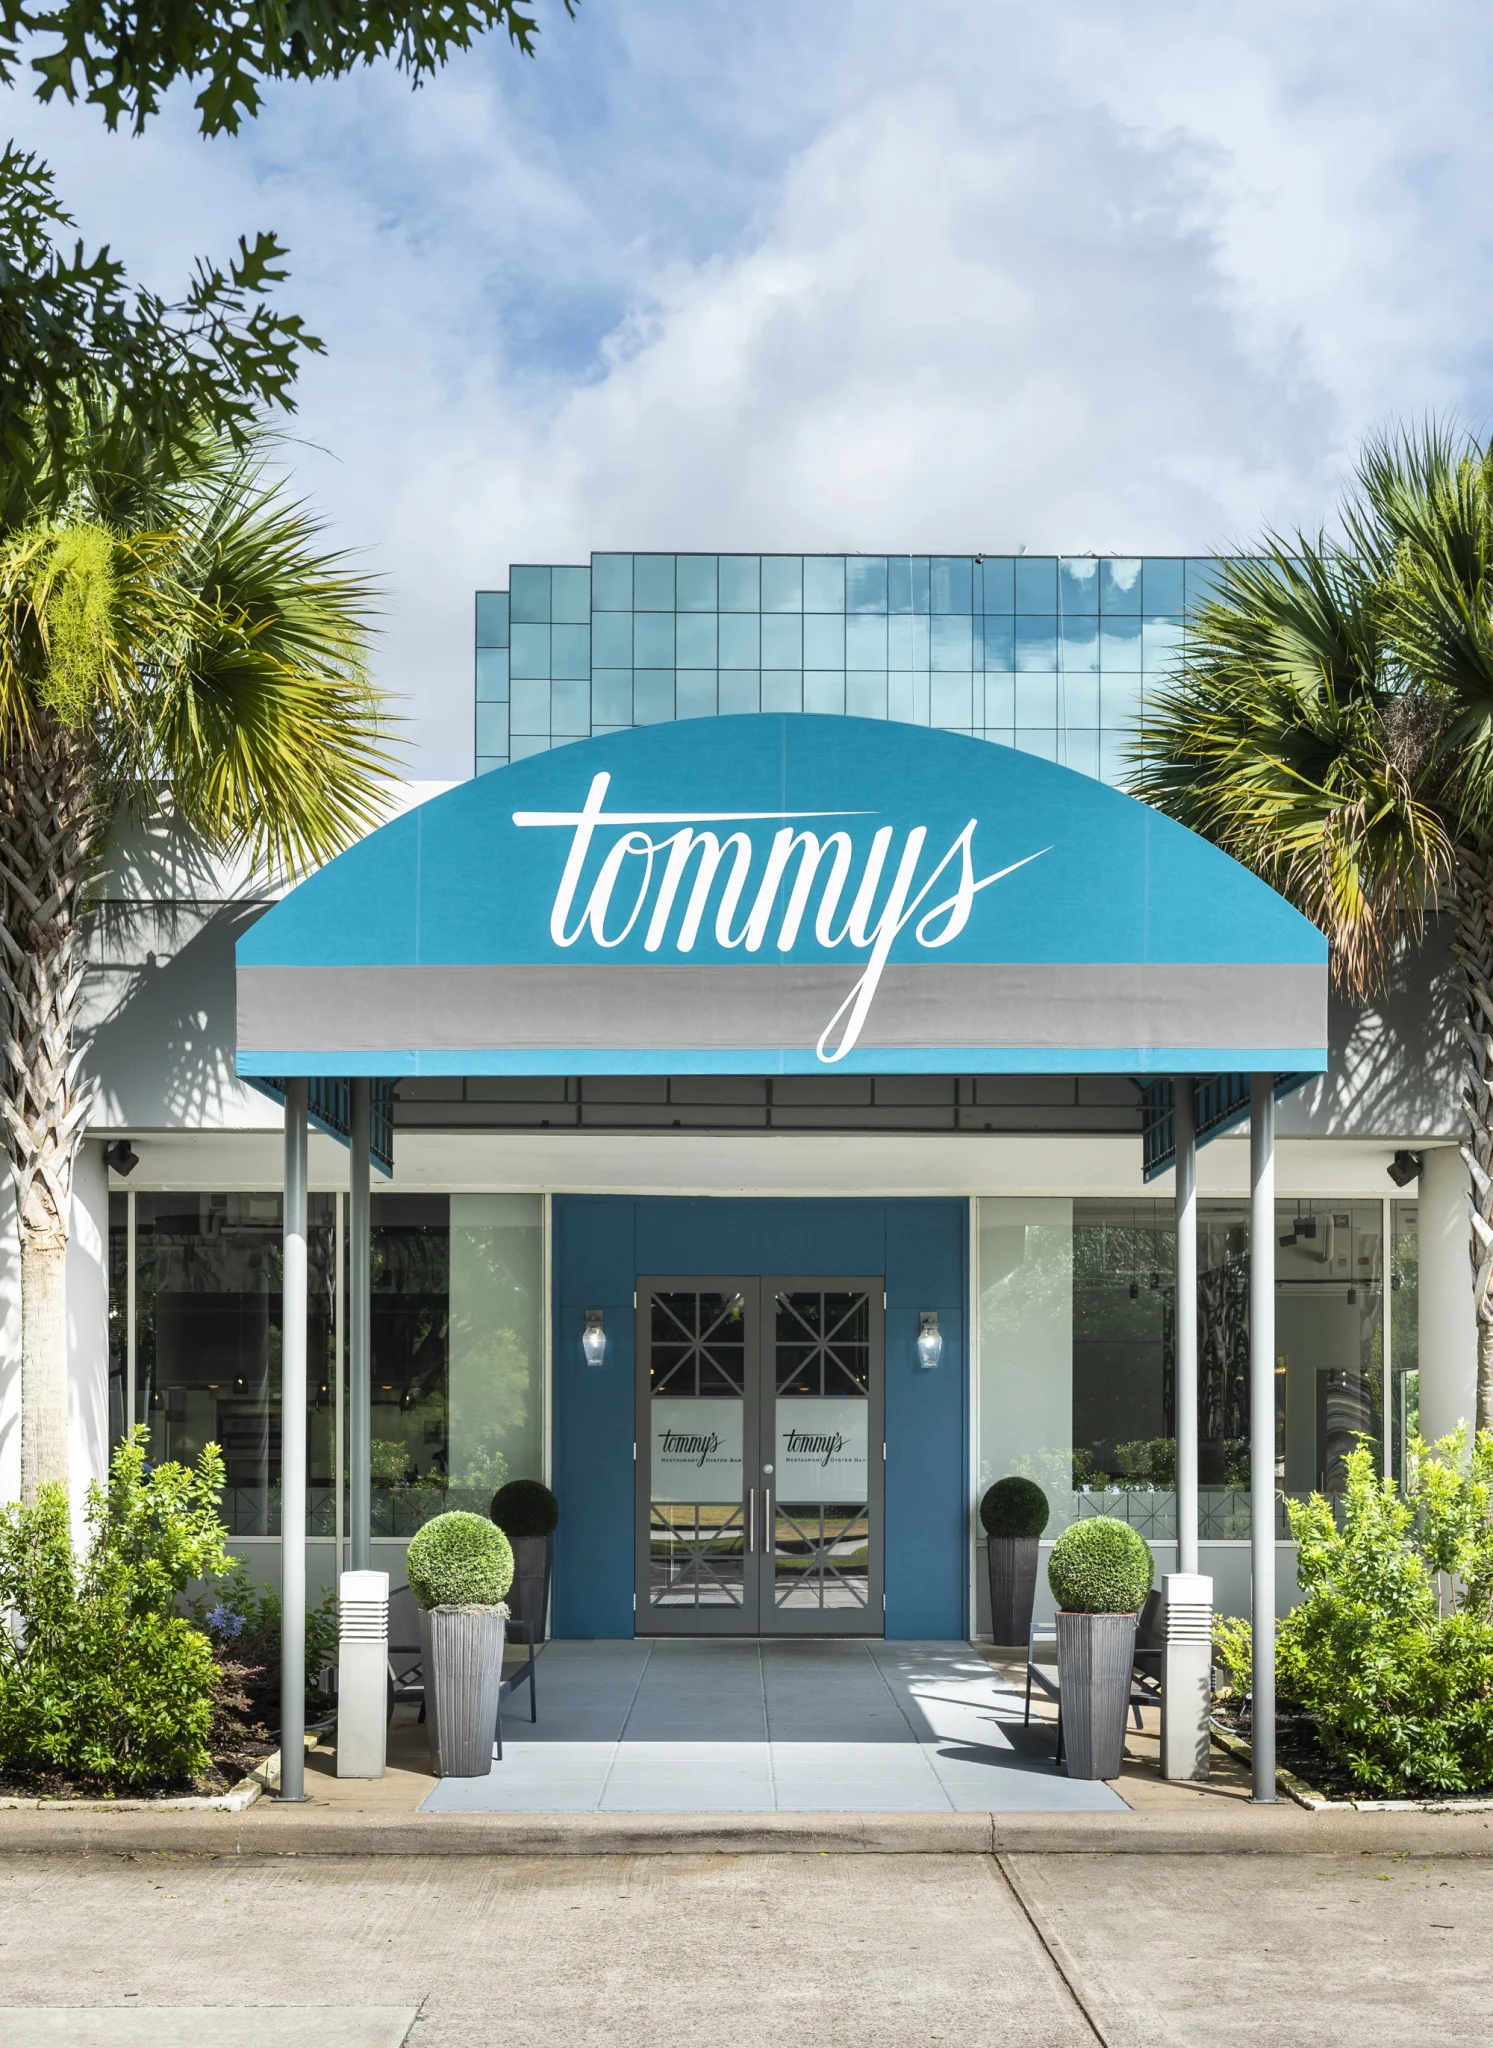 Tommys front entry